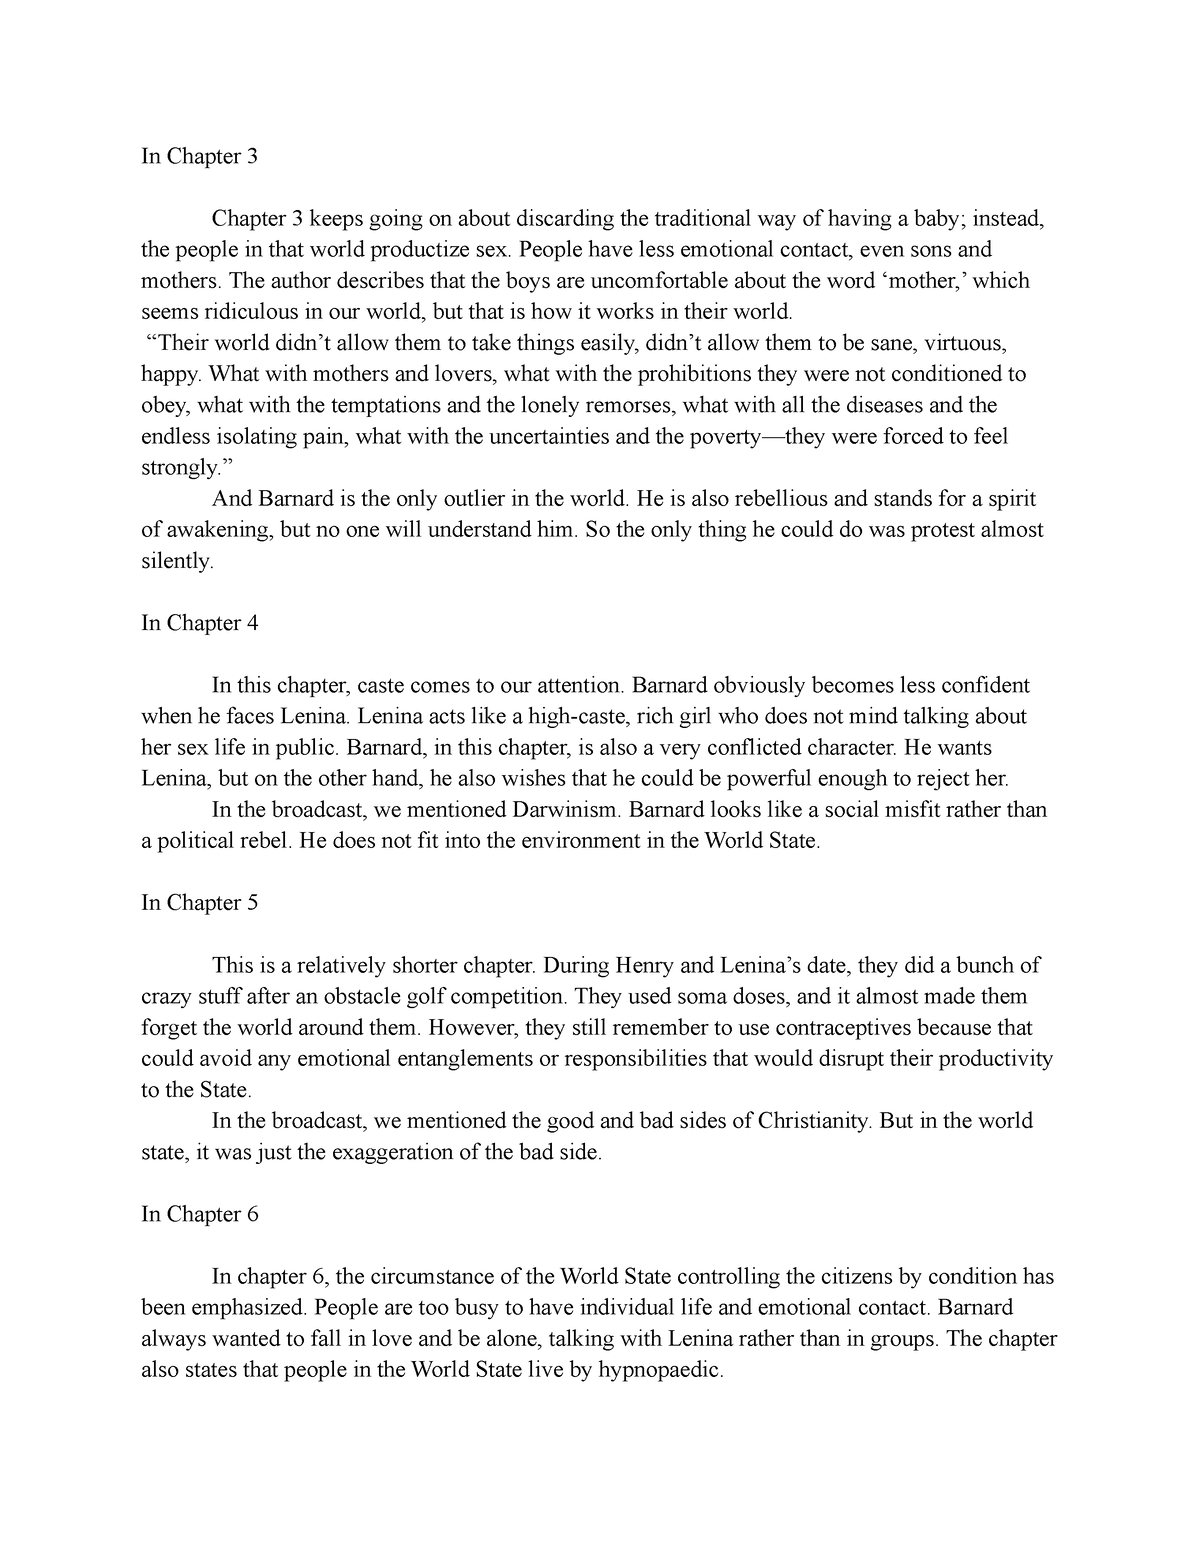 Brave New World chapter 3-10 - In Chapter 3 Chapter 3 keeps going on ...